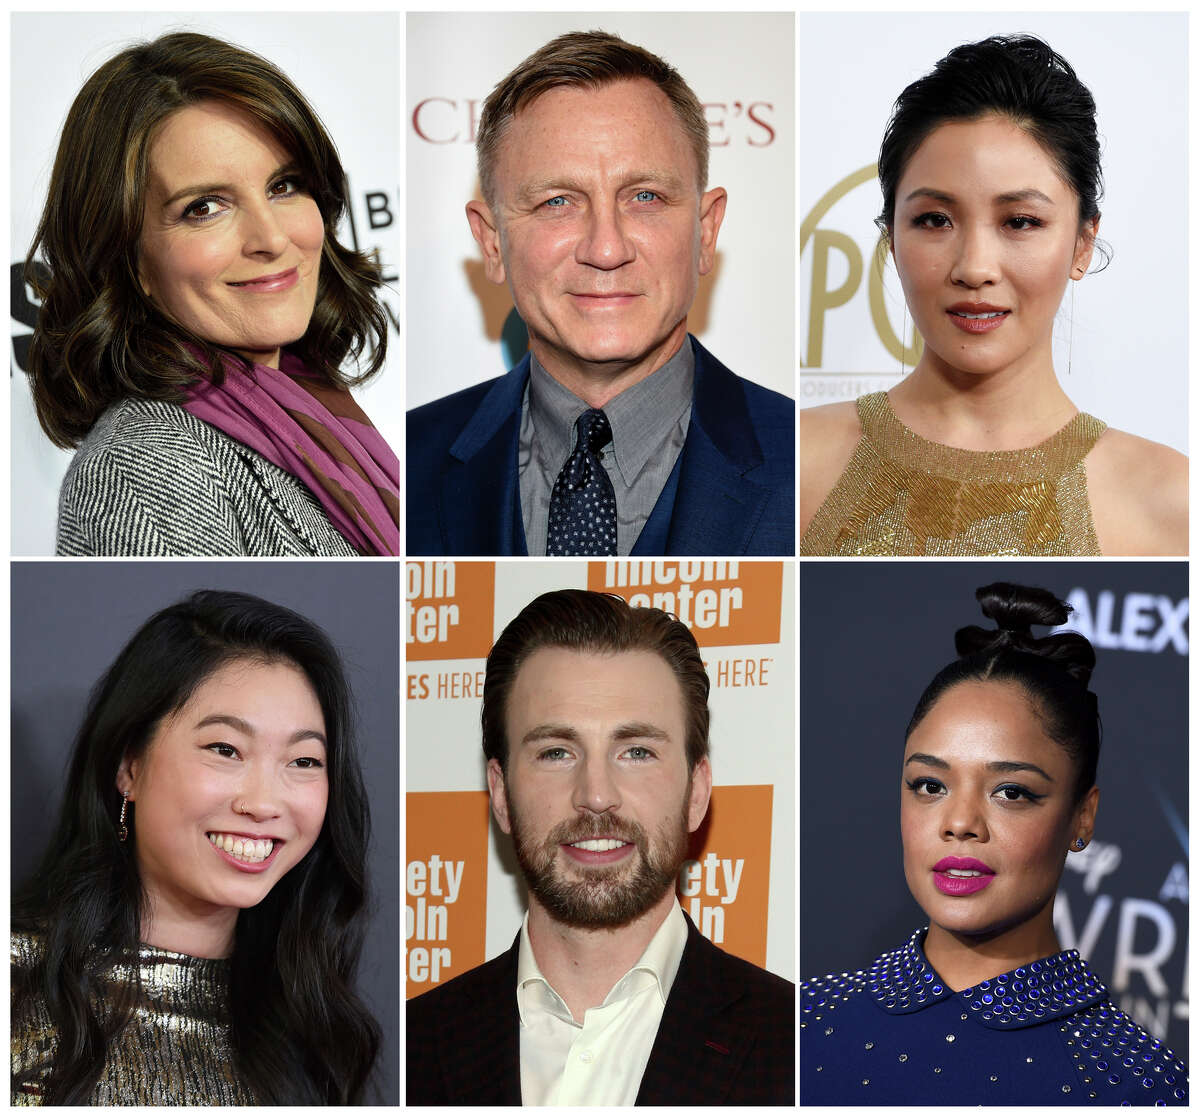 This combination photo shows, top row from left, Tina Fey, Daniel Craig, Constance Wu, and bottom row from left, Awkwafina, Chris Evans and Tessa Thompson, who will be presenters at the 91st Academy Awards on Feb. 24. (AP Photo)